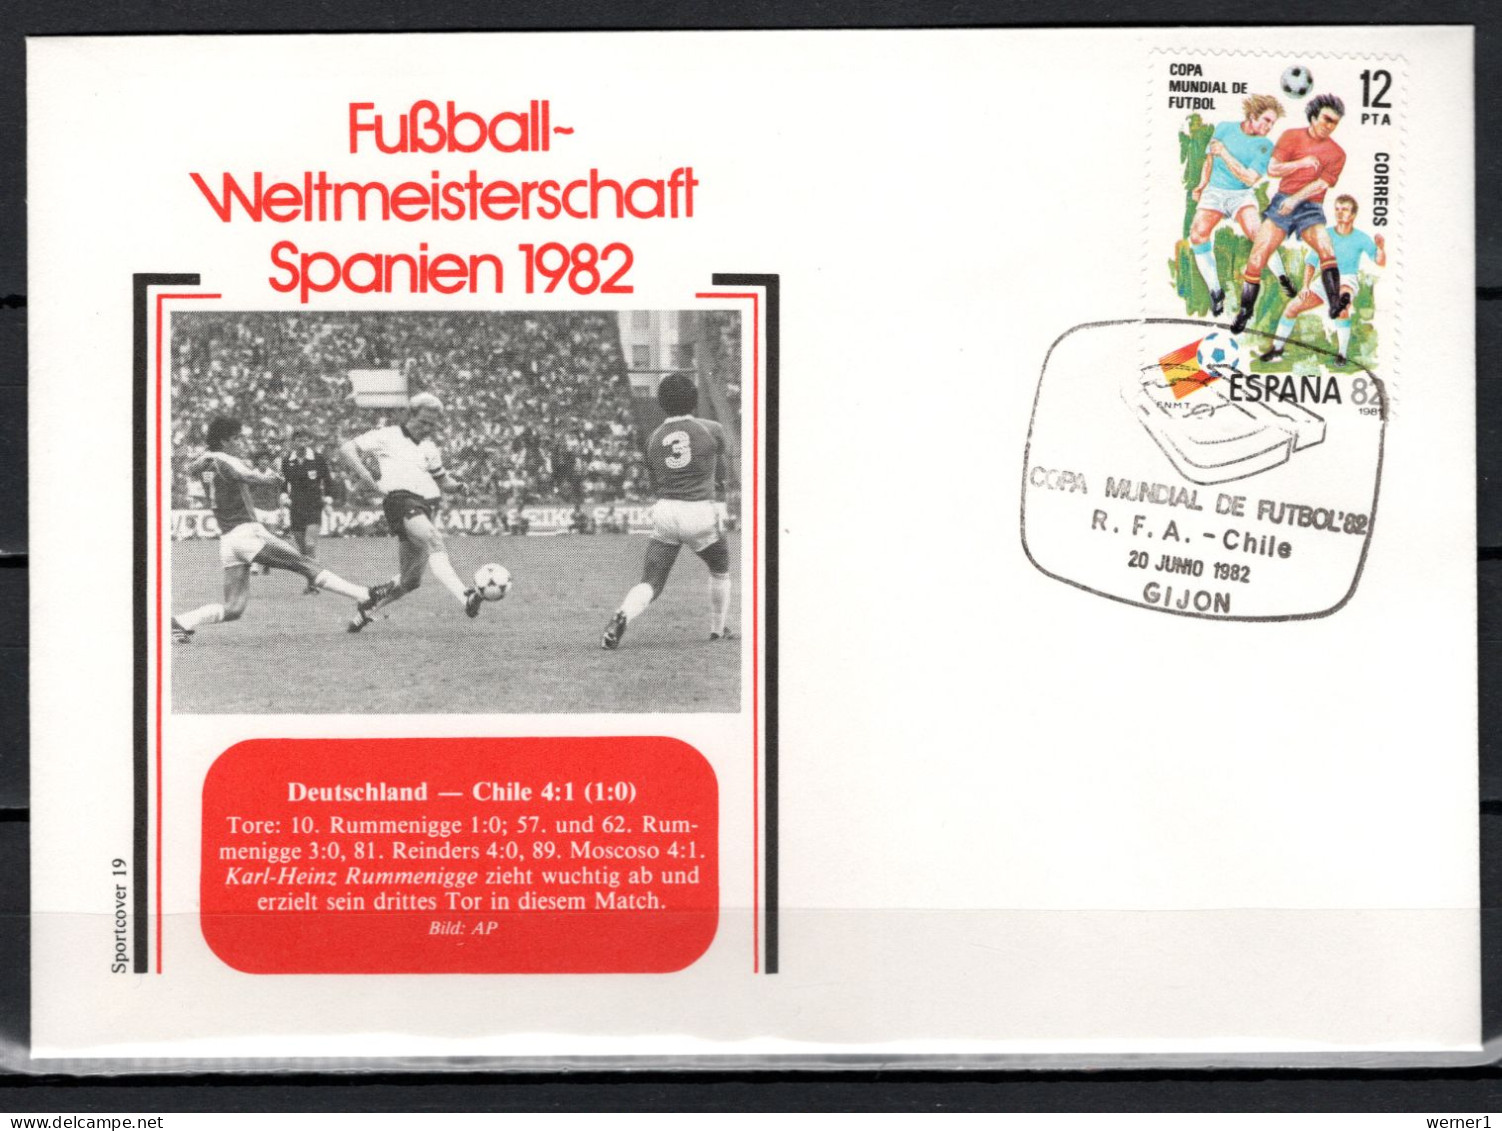 Spain 1982 Football Soccer World Cup Commemorative Cover Match Germany - Chile 4:1 - 1982 – Spain